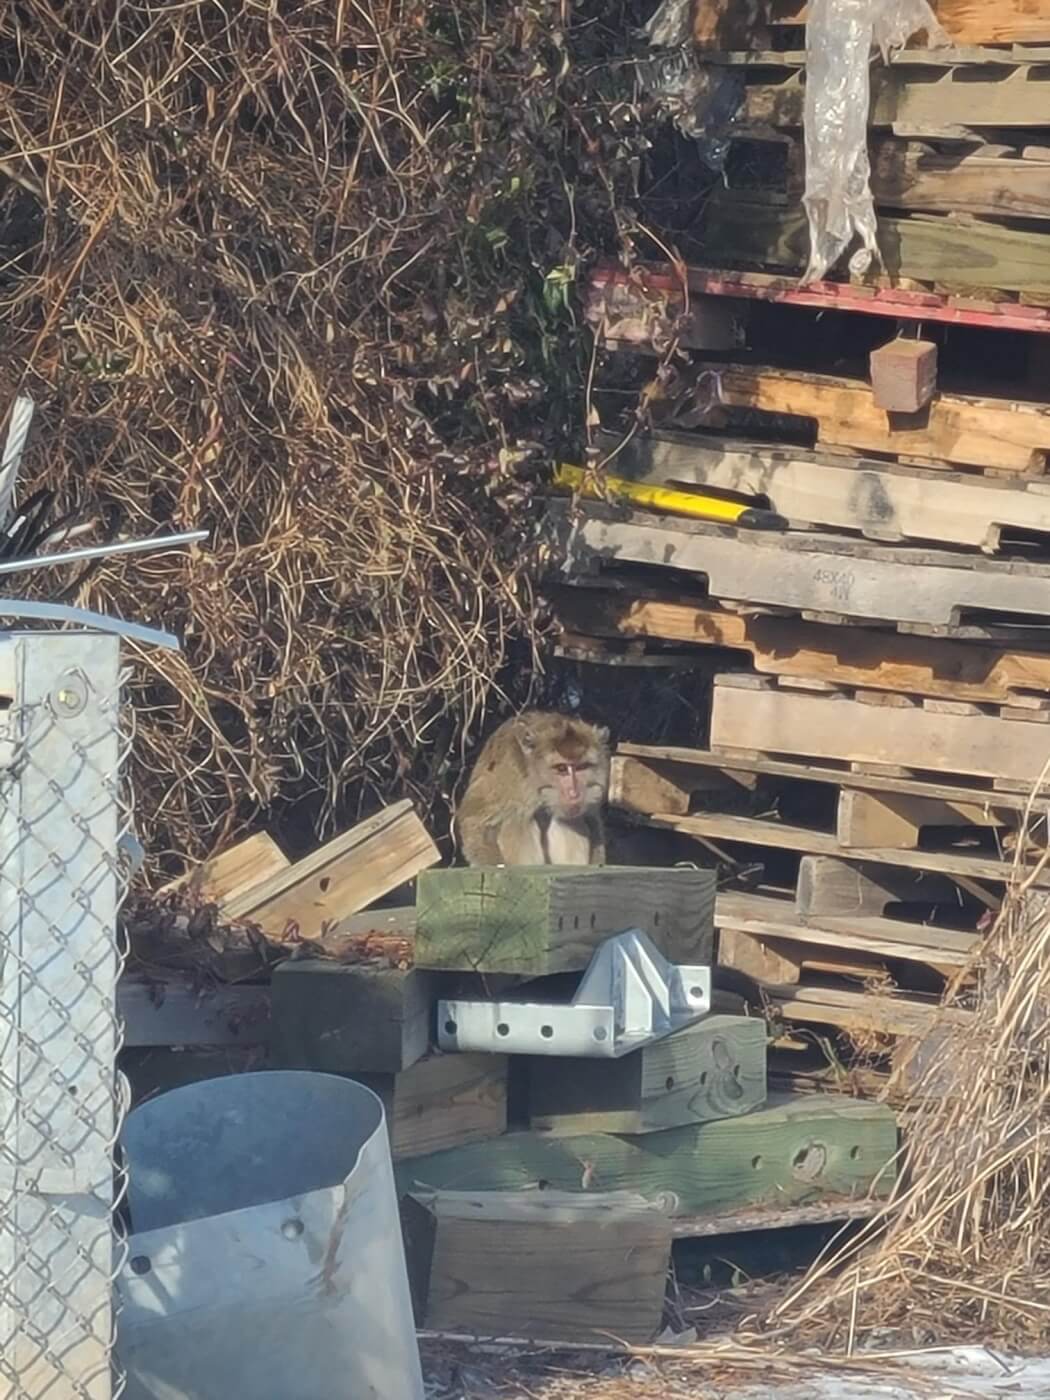 Monkey who escaped crash is spotted among crates